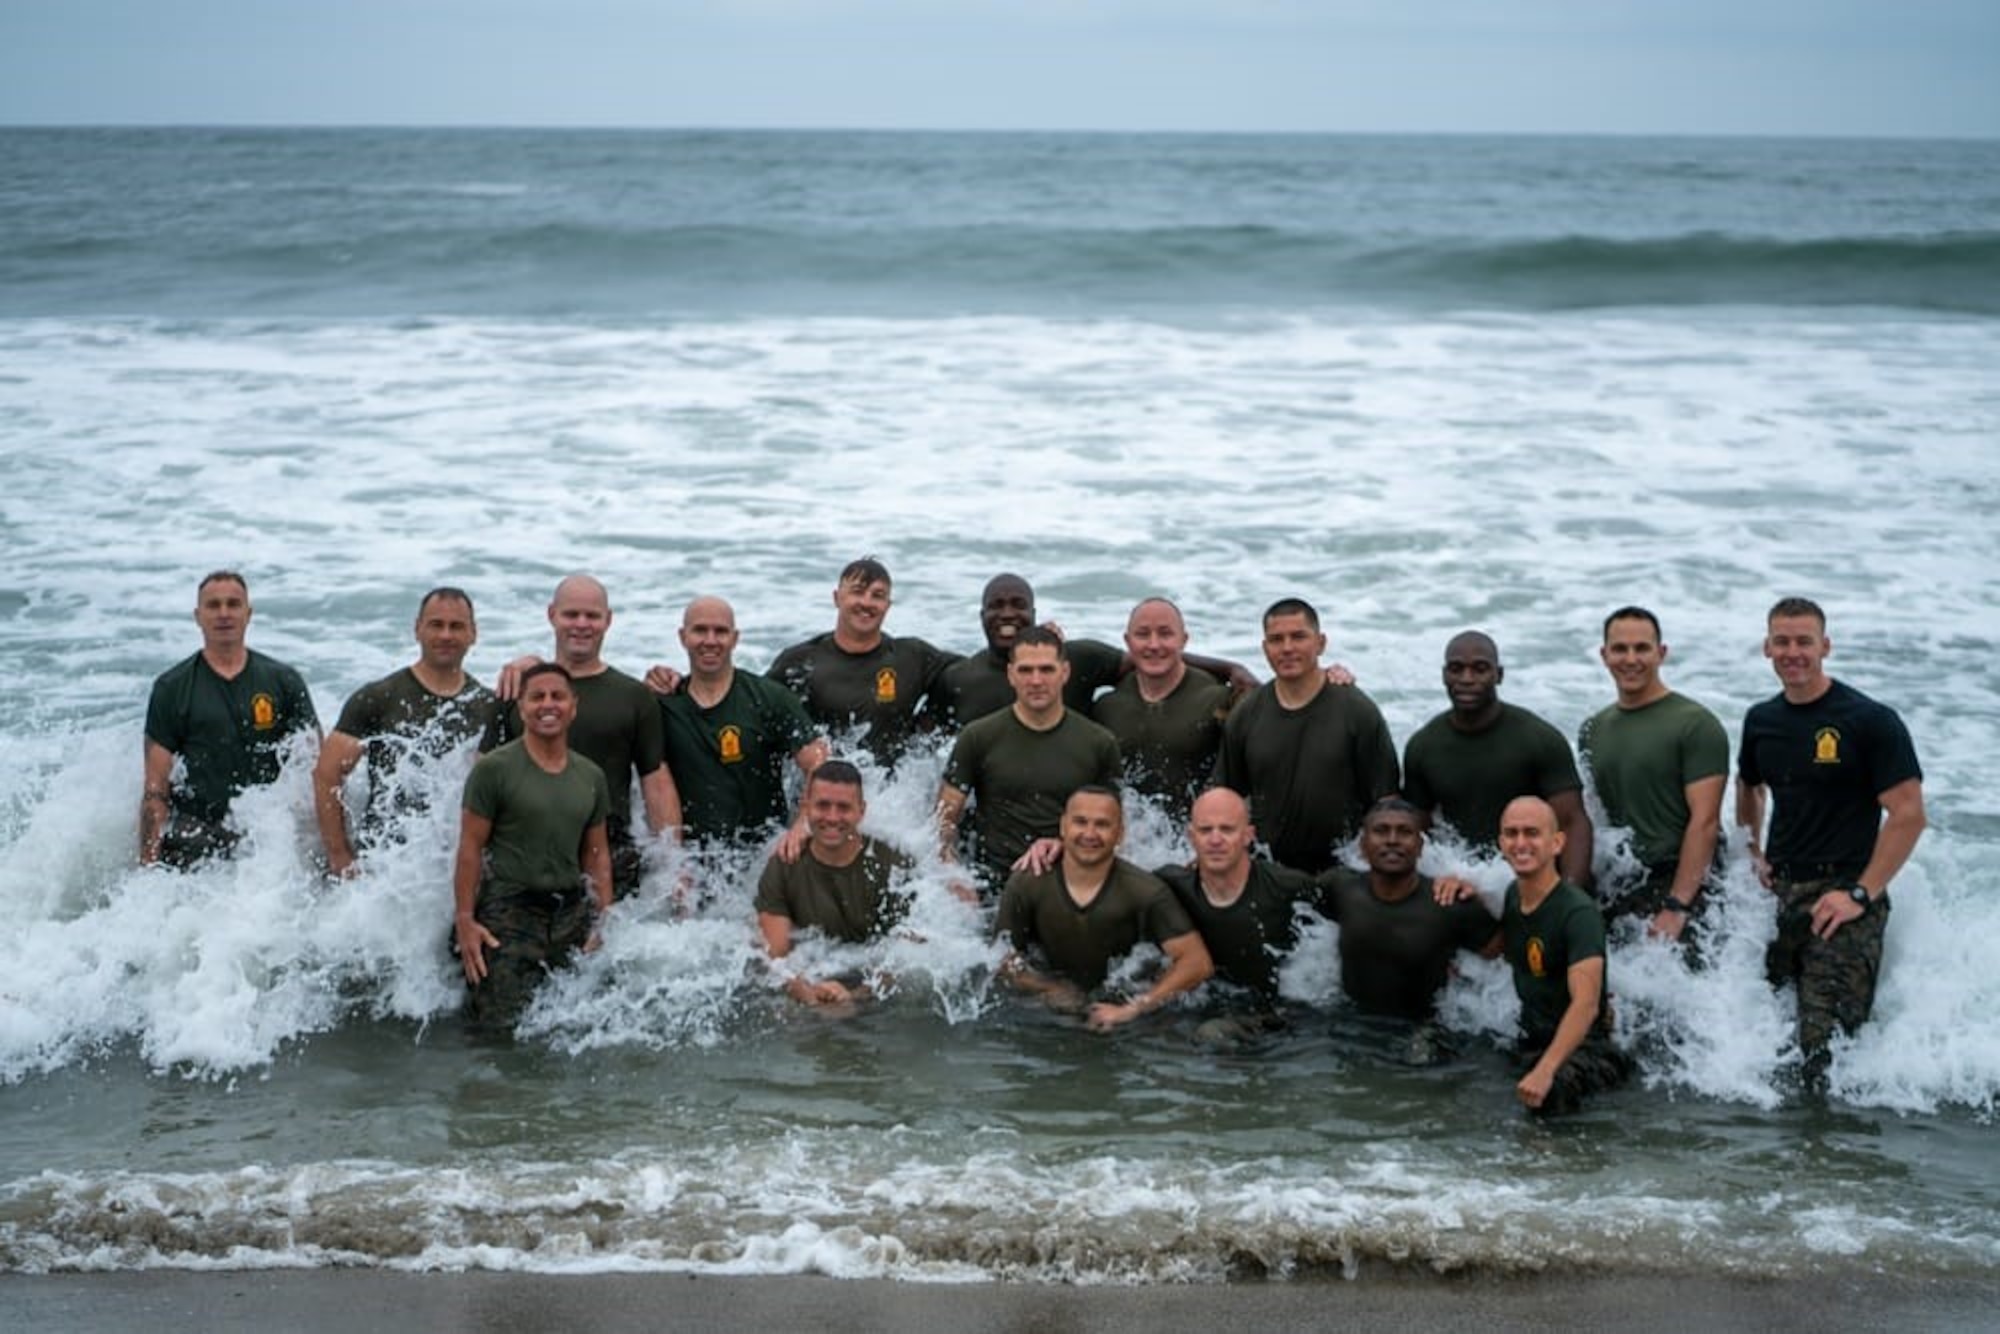 Master Sgt. Paul Willson (kneeling, on left) poses with his group on the San Onofre Beach during the Marine Corps Staff Non-Commissioned Officer Academy at Camp Pendleton, California.